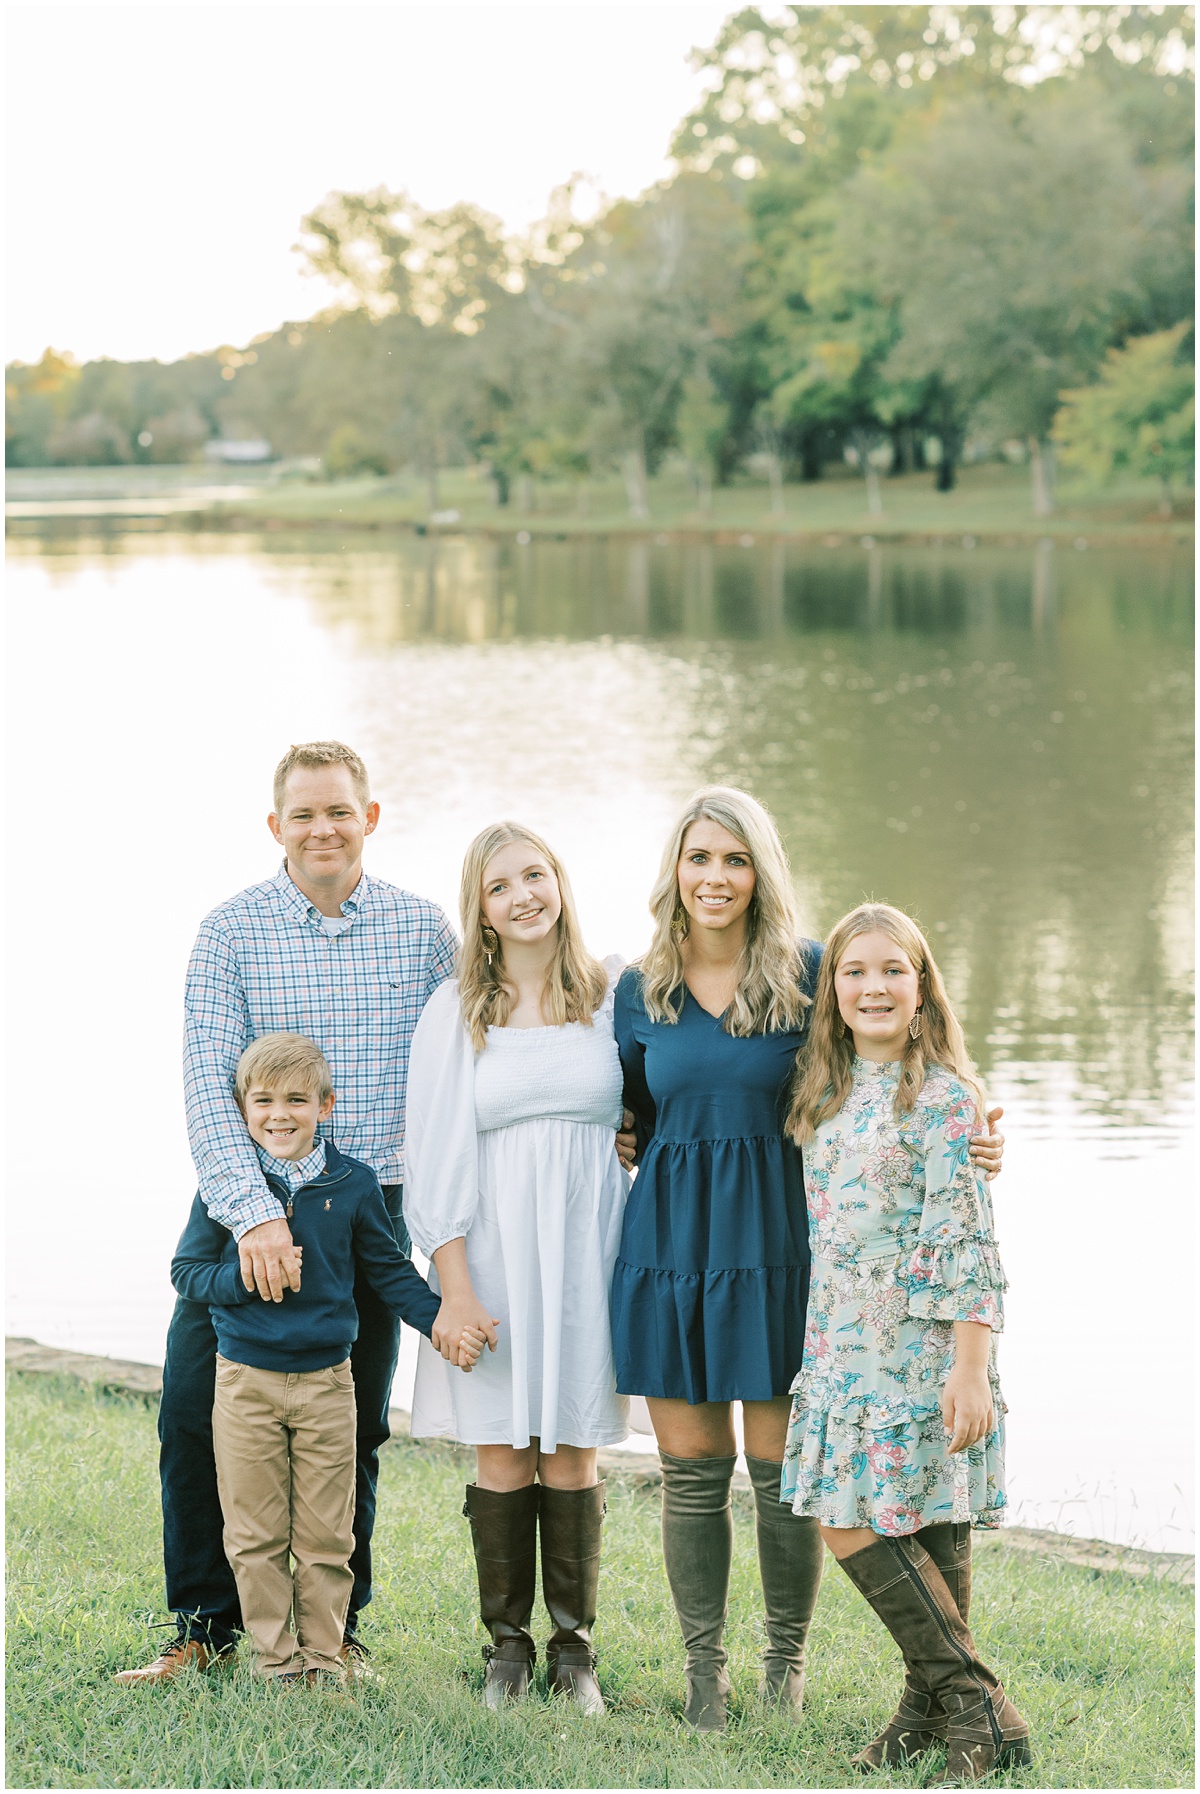 Fall family photo session, Greer SC photographer